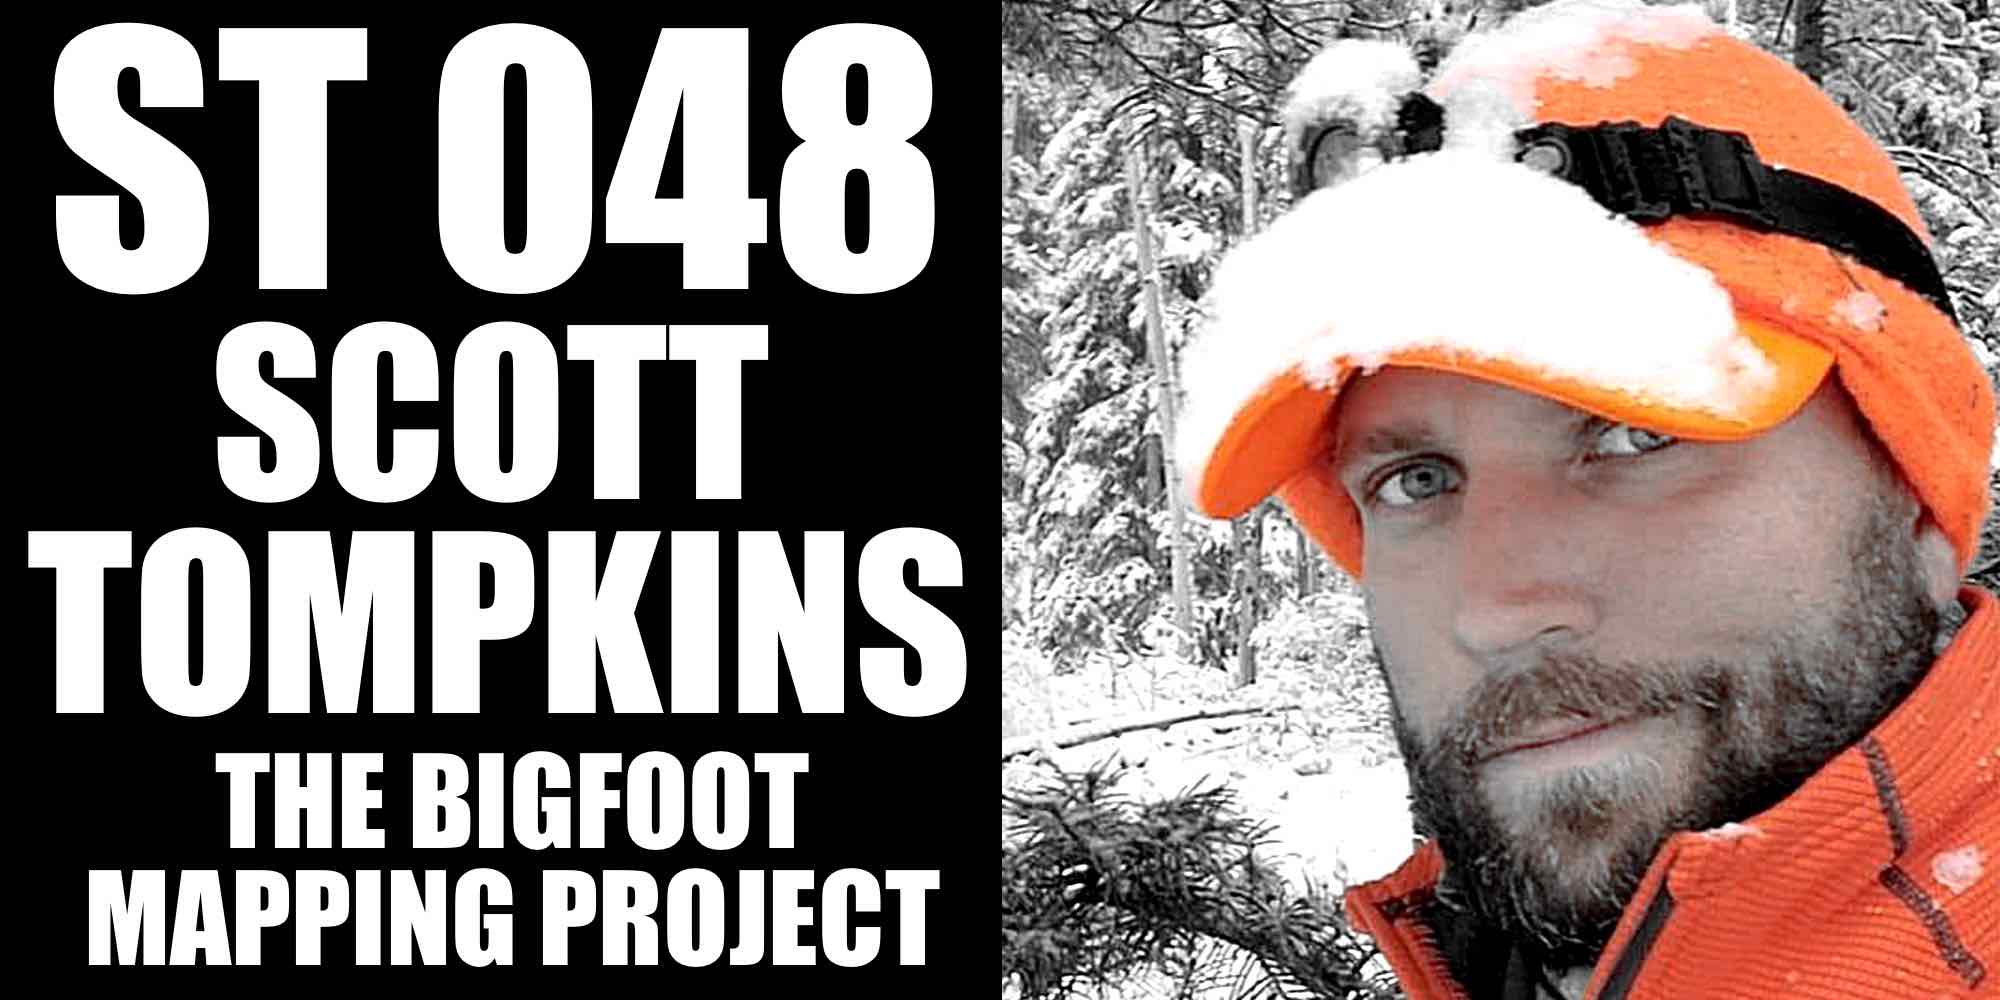 Bigfoot Mapping Project